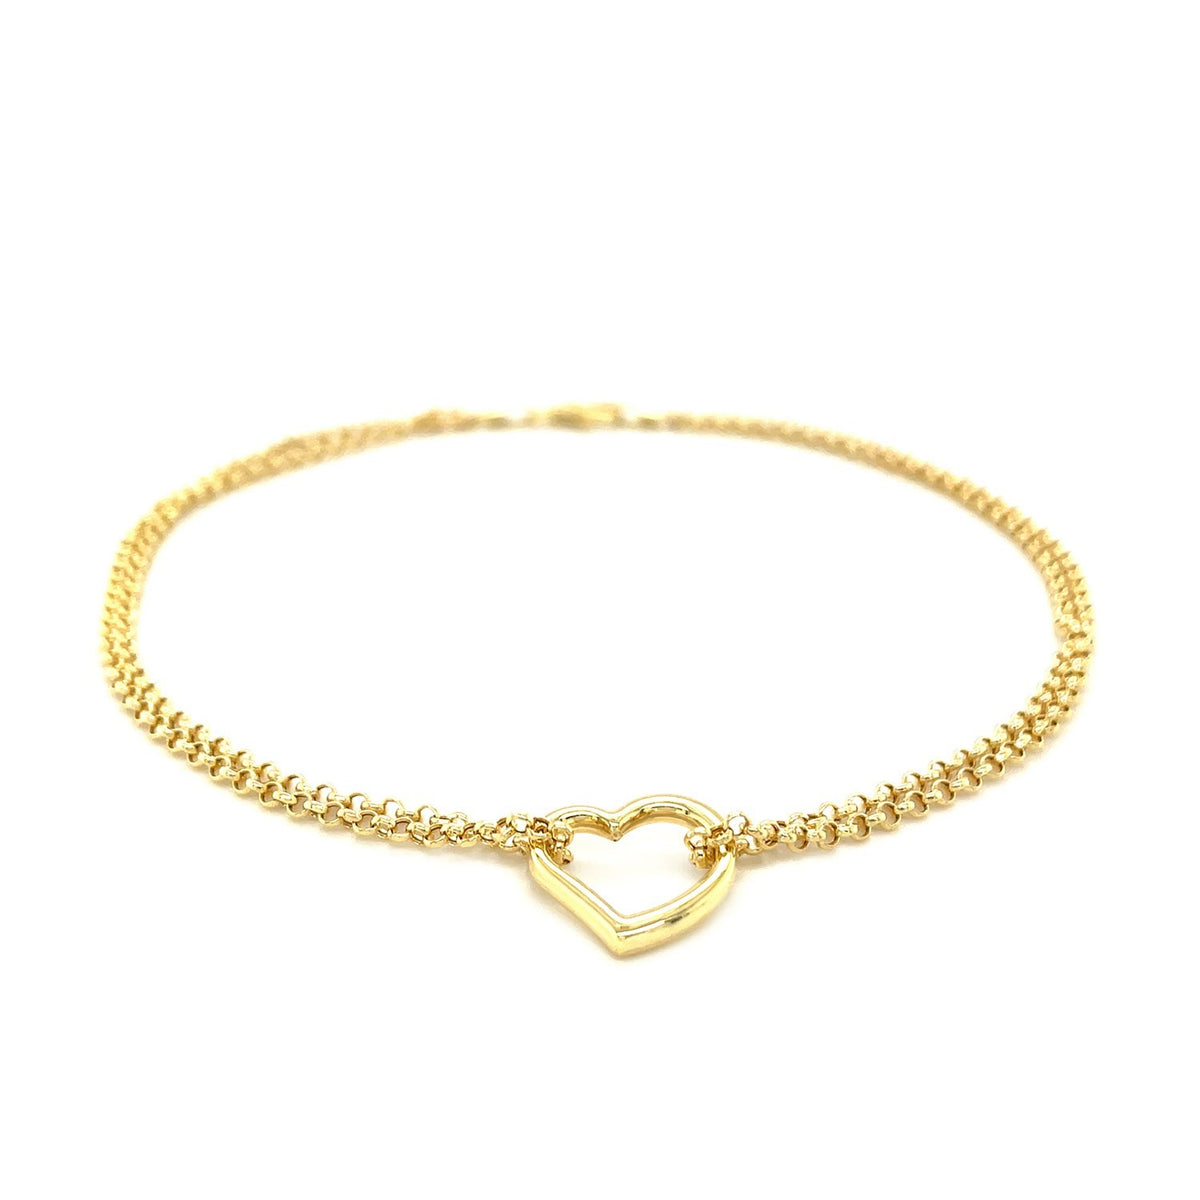 Double Rolo Chain Anklet with an Open Heart Station - 10k Yellow Gold